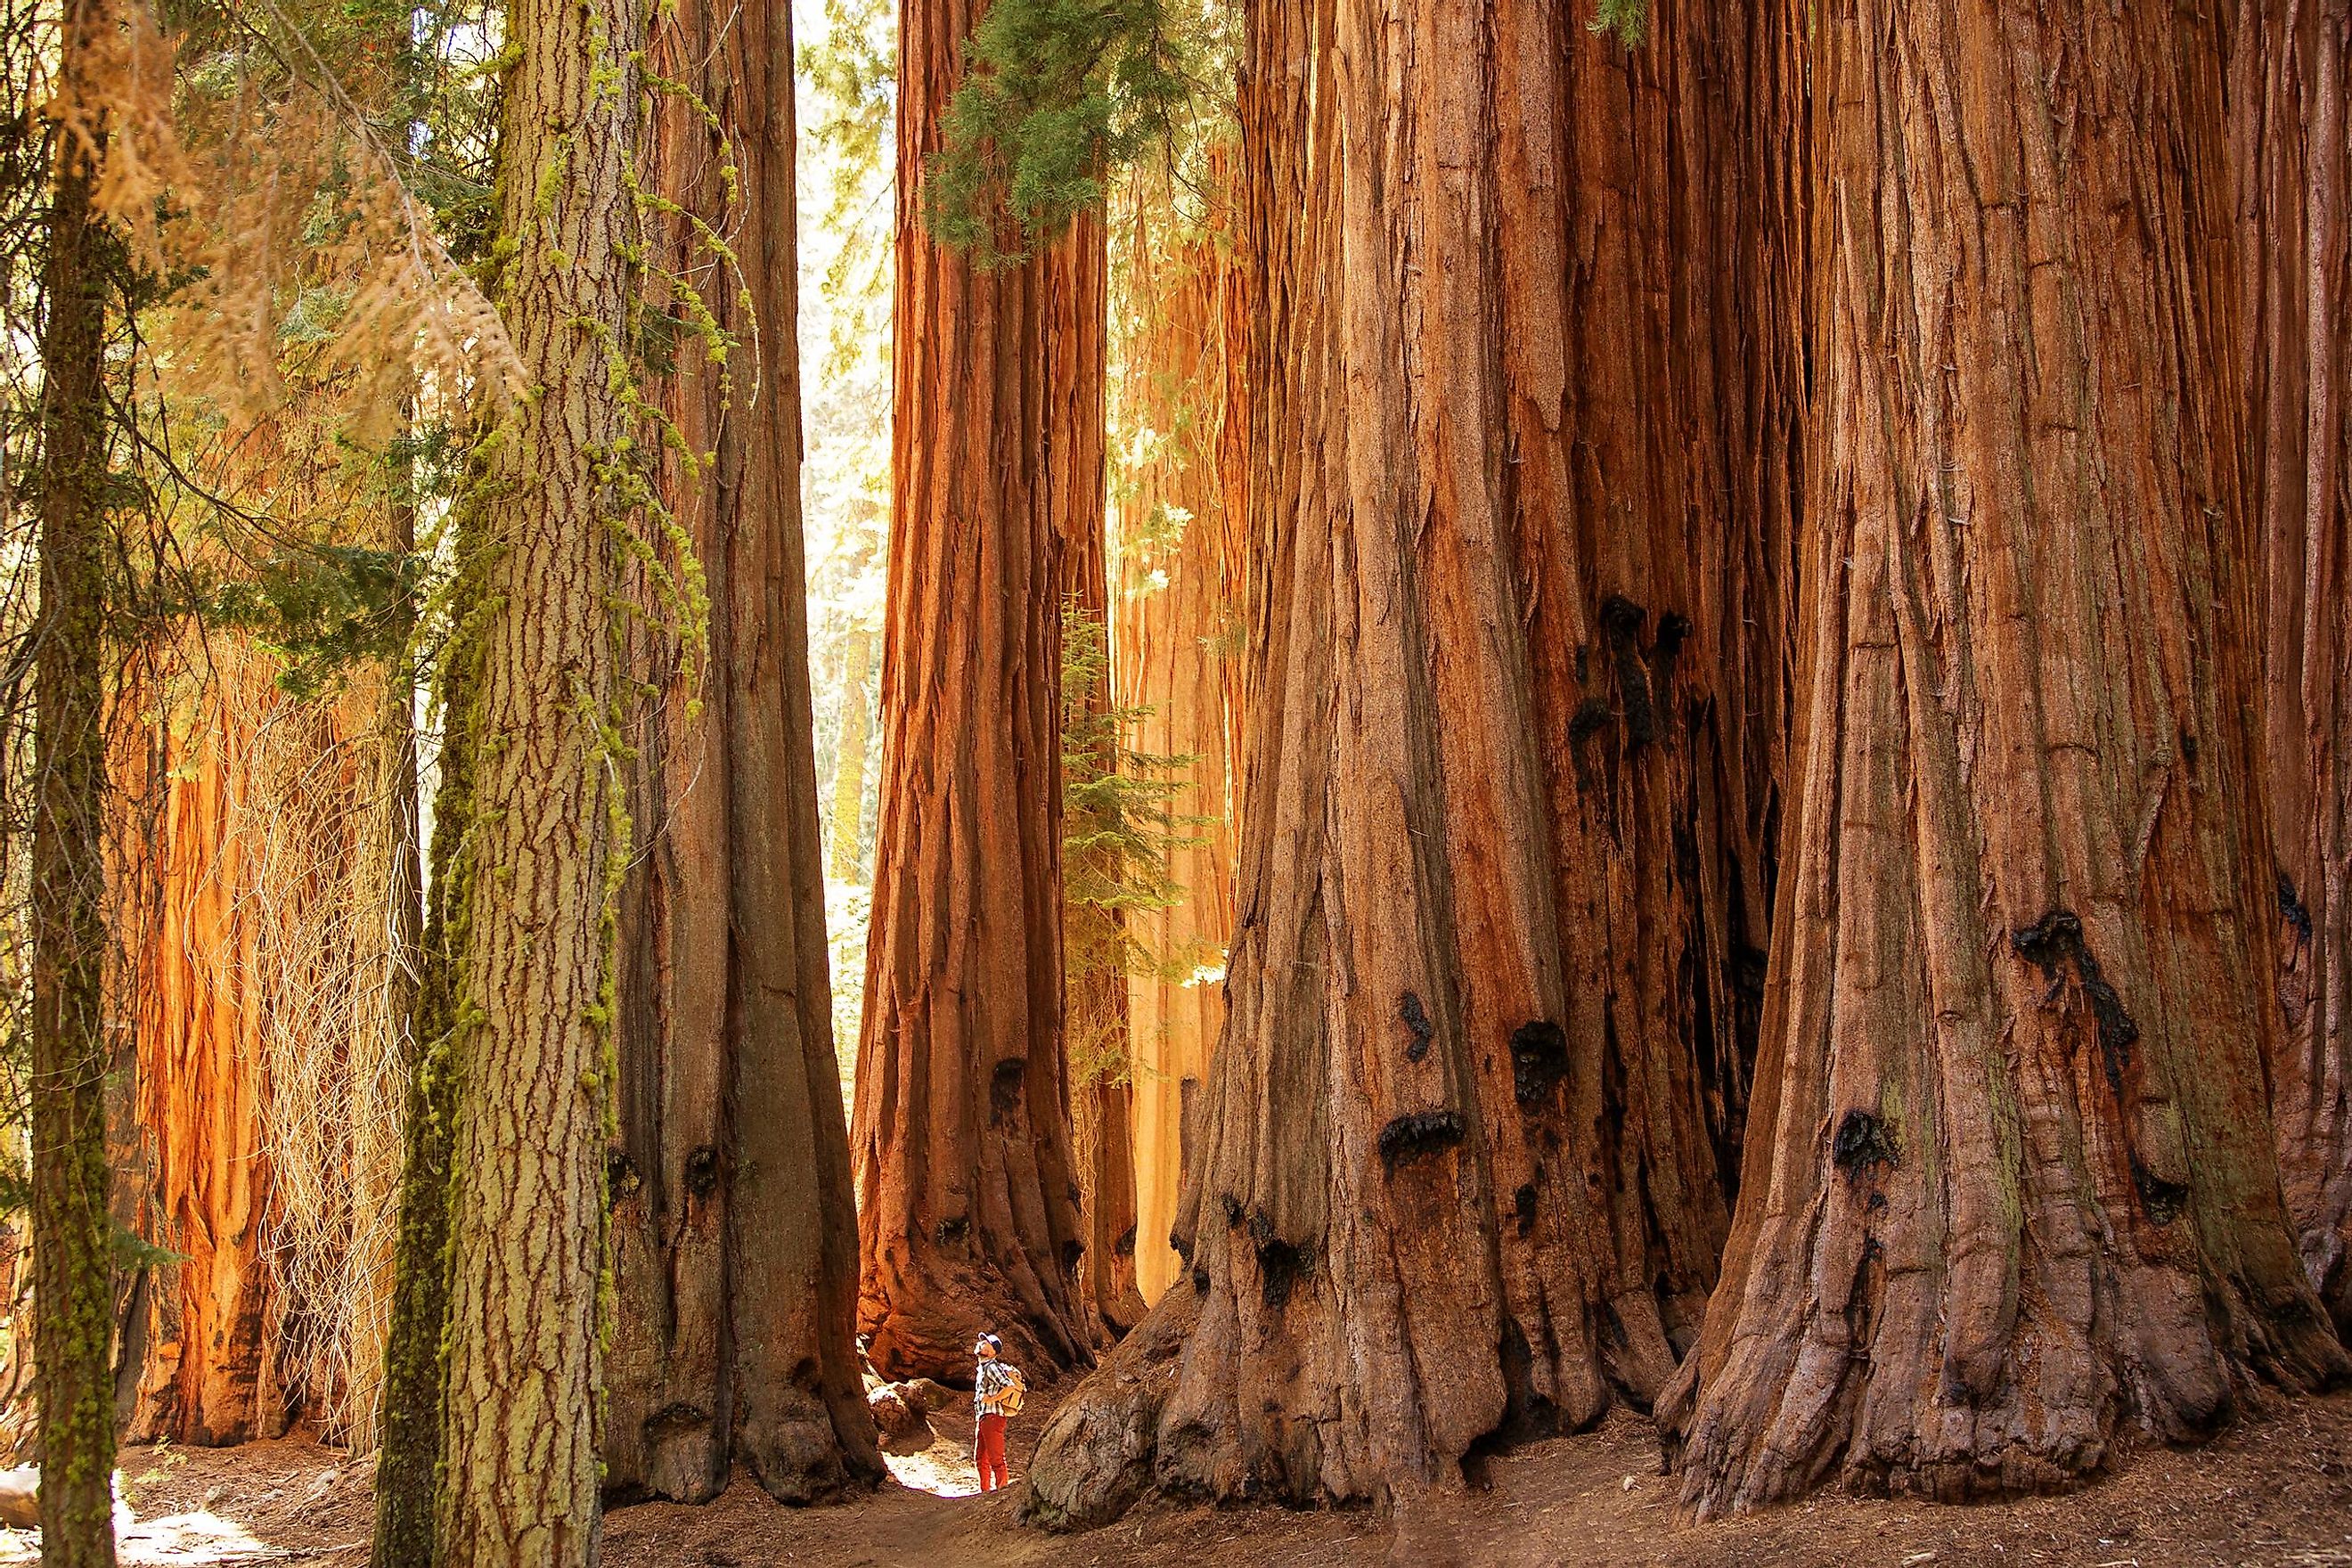 Giant sequoia trees in the Mariposa Grove.